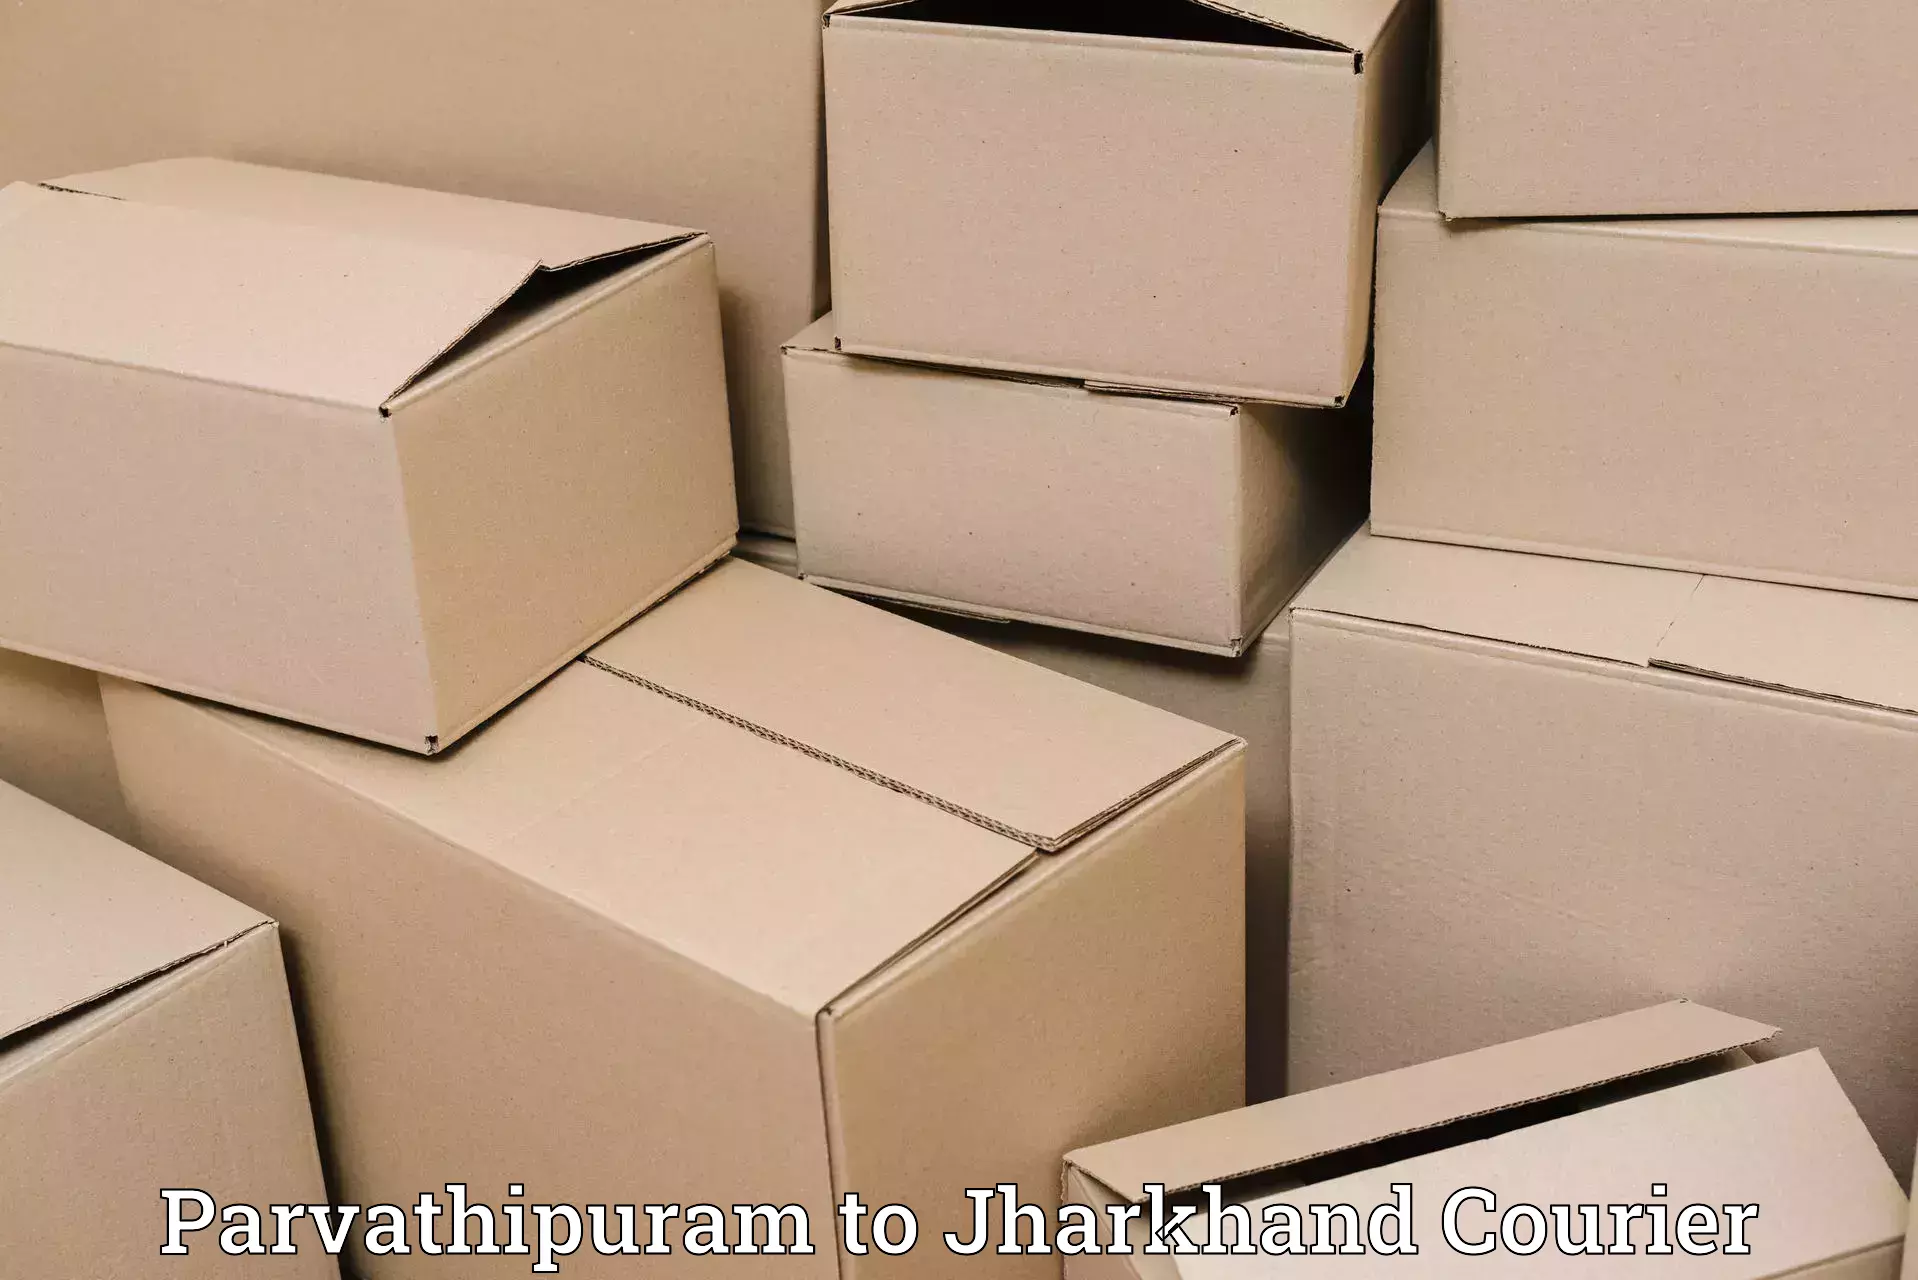 Supply chain efficiency Parvathipuram to Boarijore